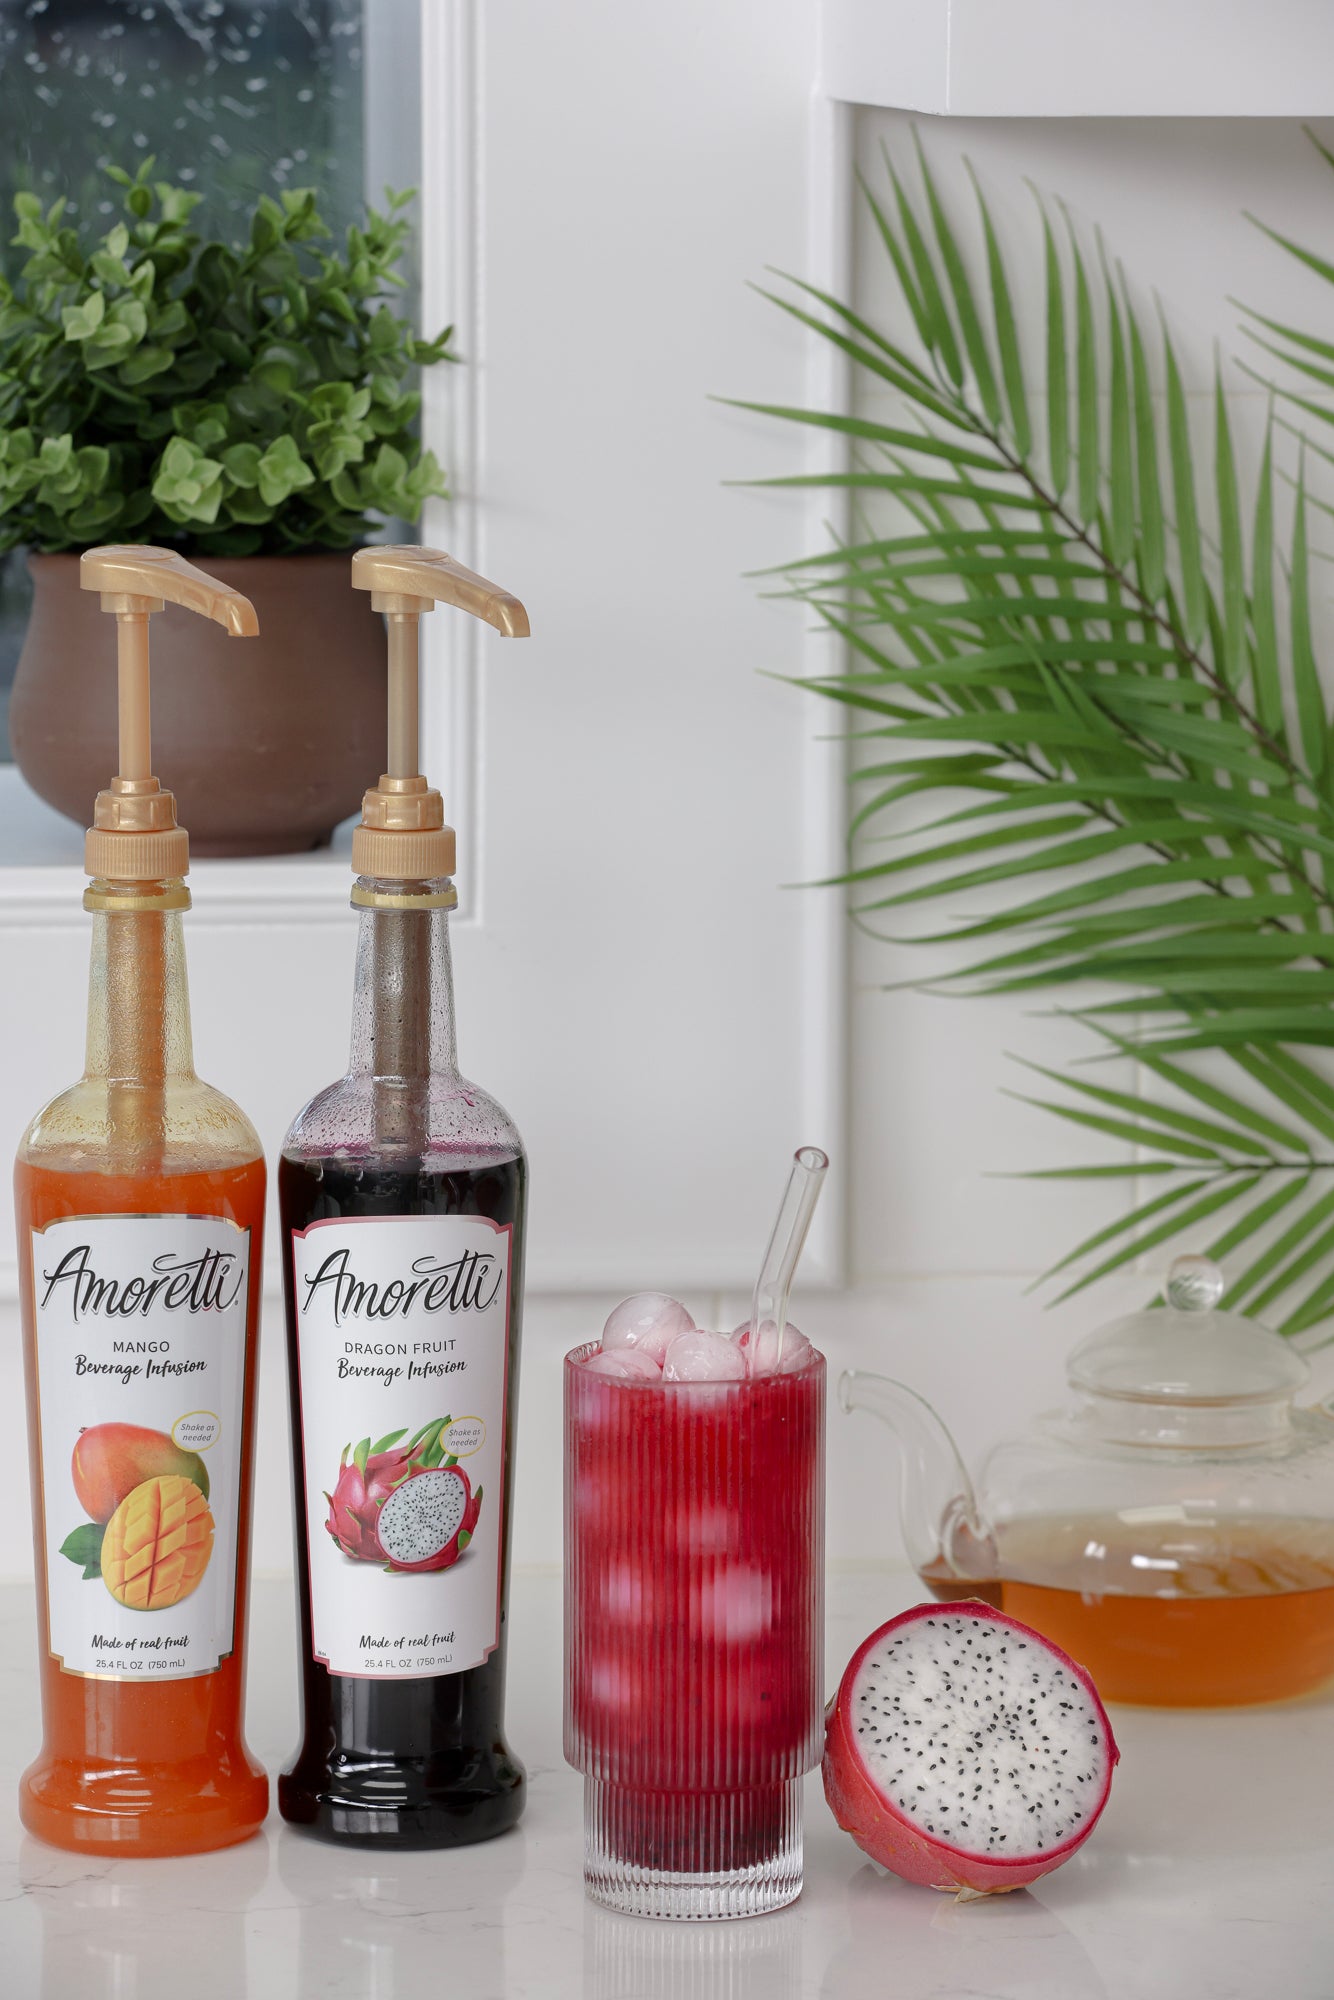 Amoretti Mango Beverage Infusion, Amoretti Dragon Fruit Beverage Infusion next to Dragon Fruit Tea with fresh dragon fruit next to a tea pot of green tea and palm leaves sitting on a kitchen counter